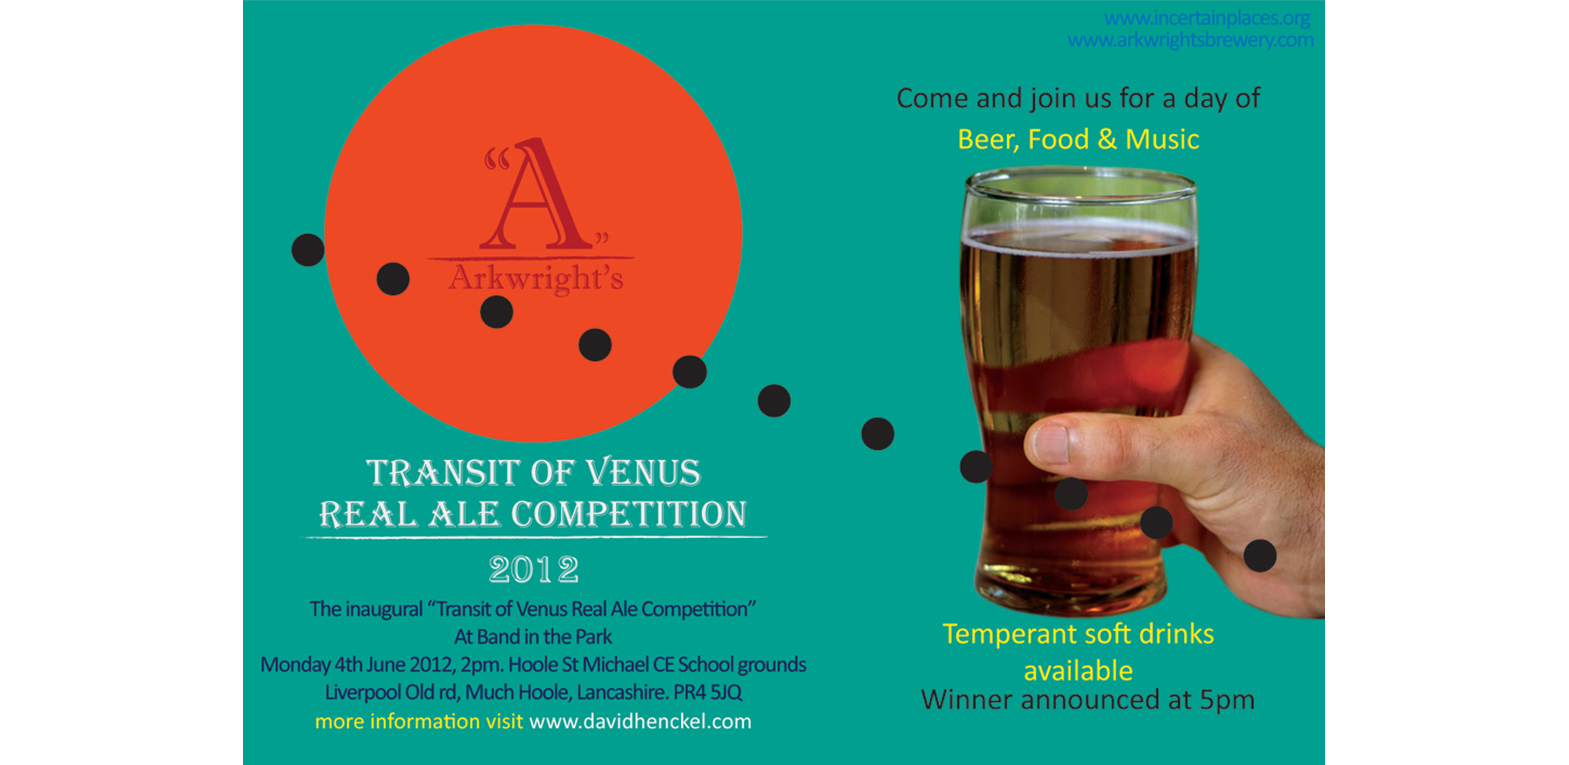 A poster for the Transit of Venus Real Ale competition 2012